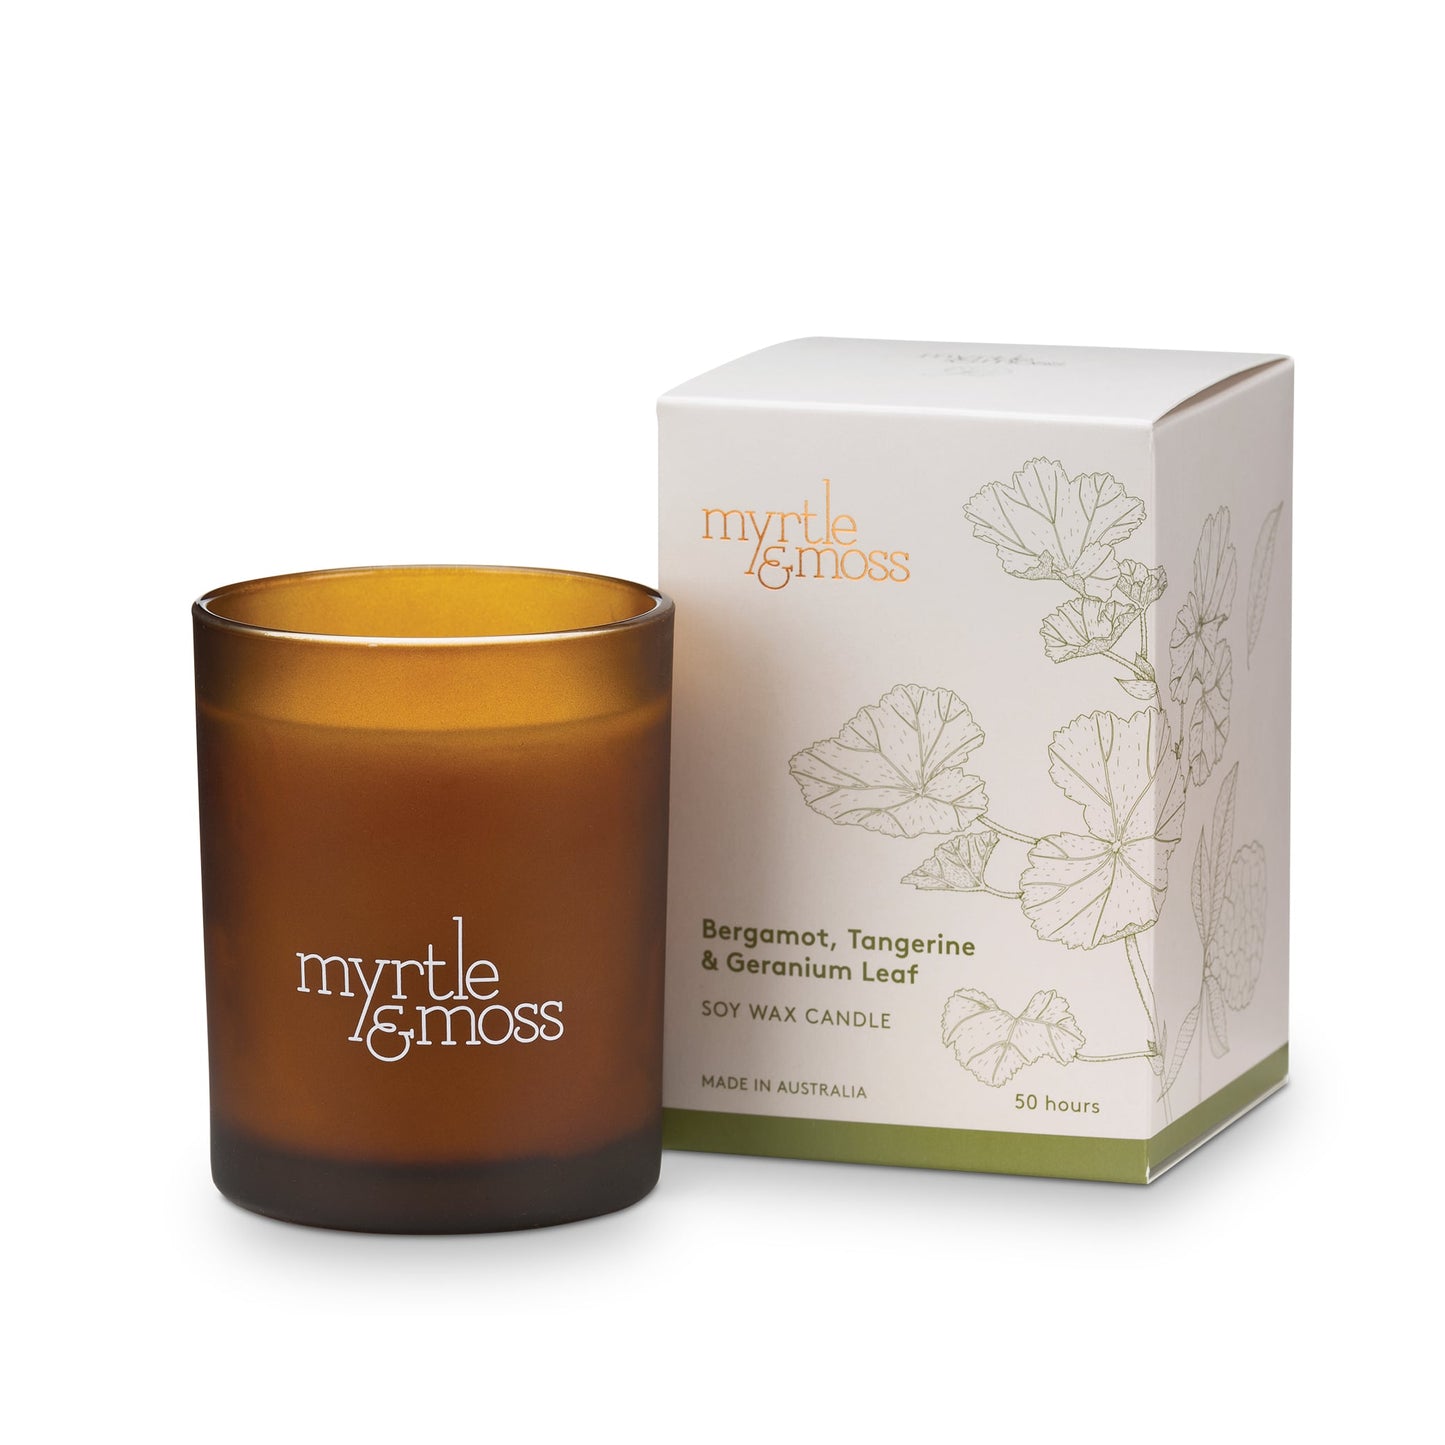 Myrtle and Moss 50hr Soy Wax Candle Bergamot, Tangerine and Geranium Leaf